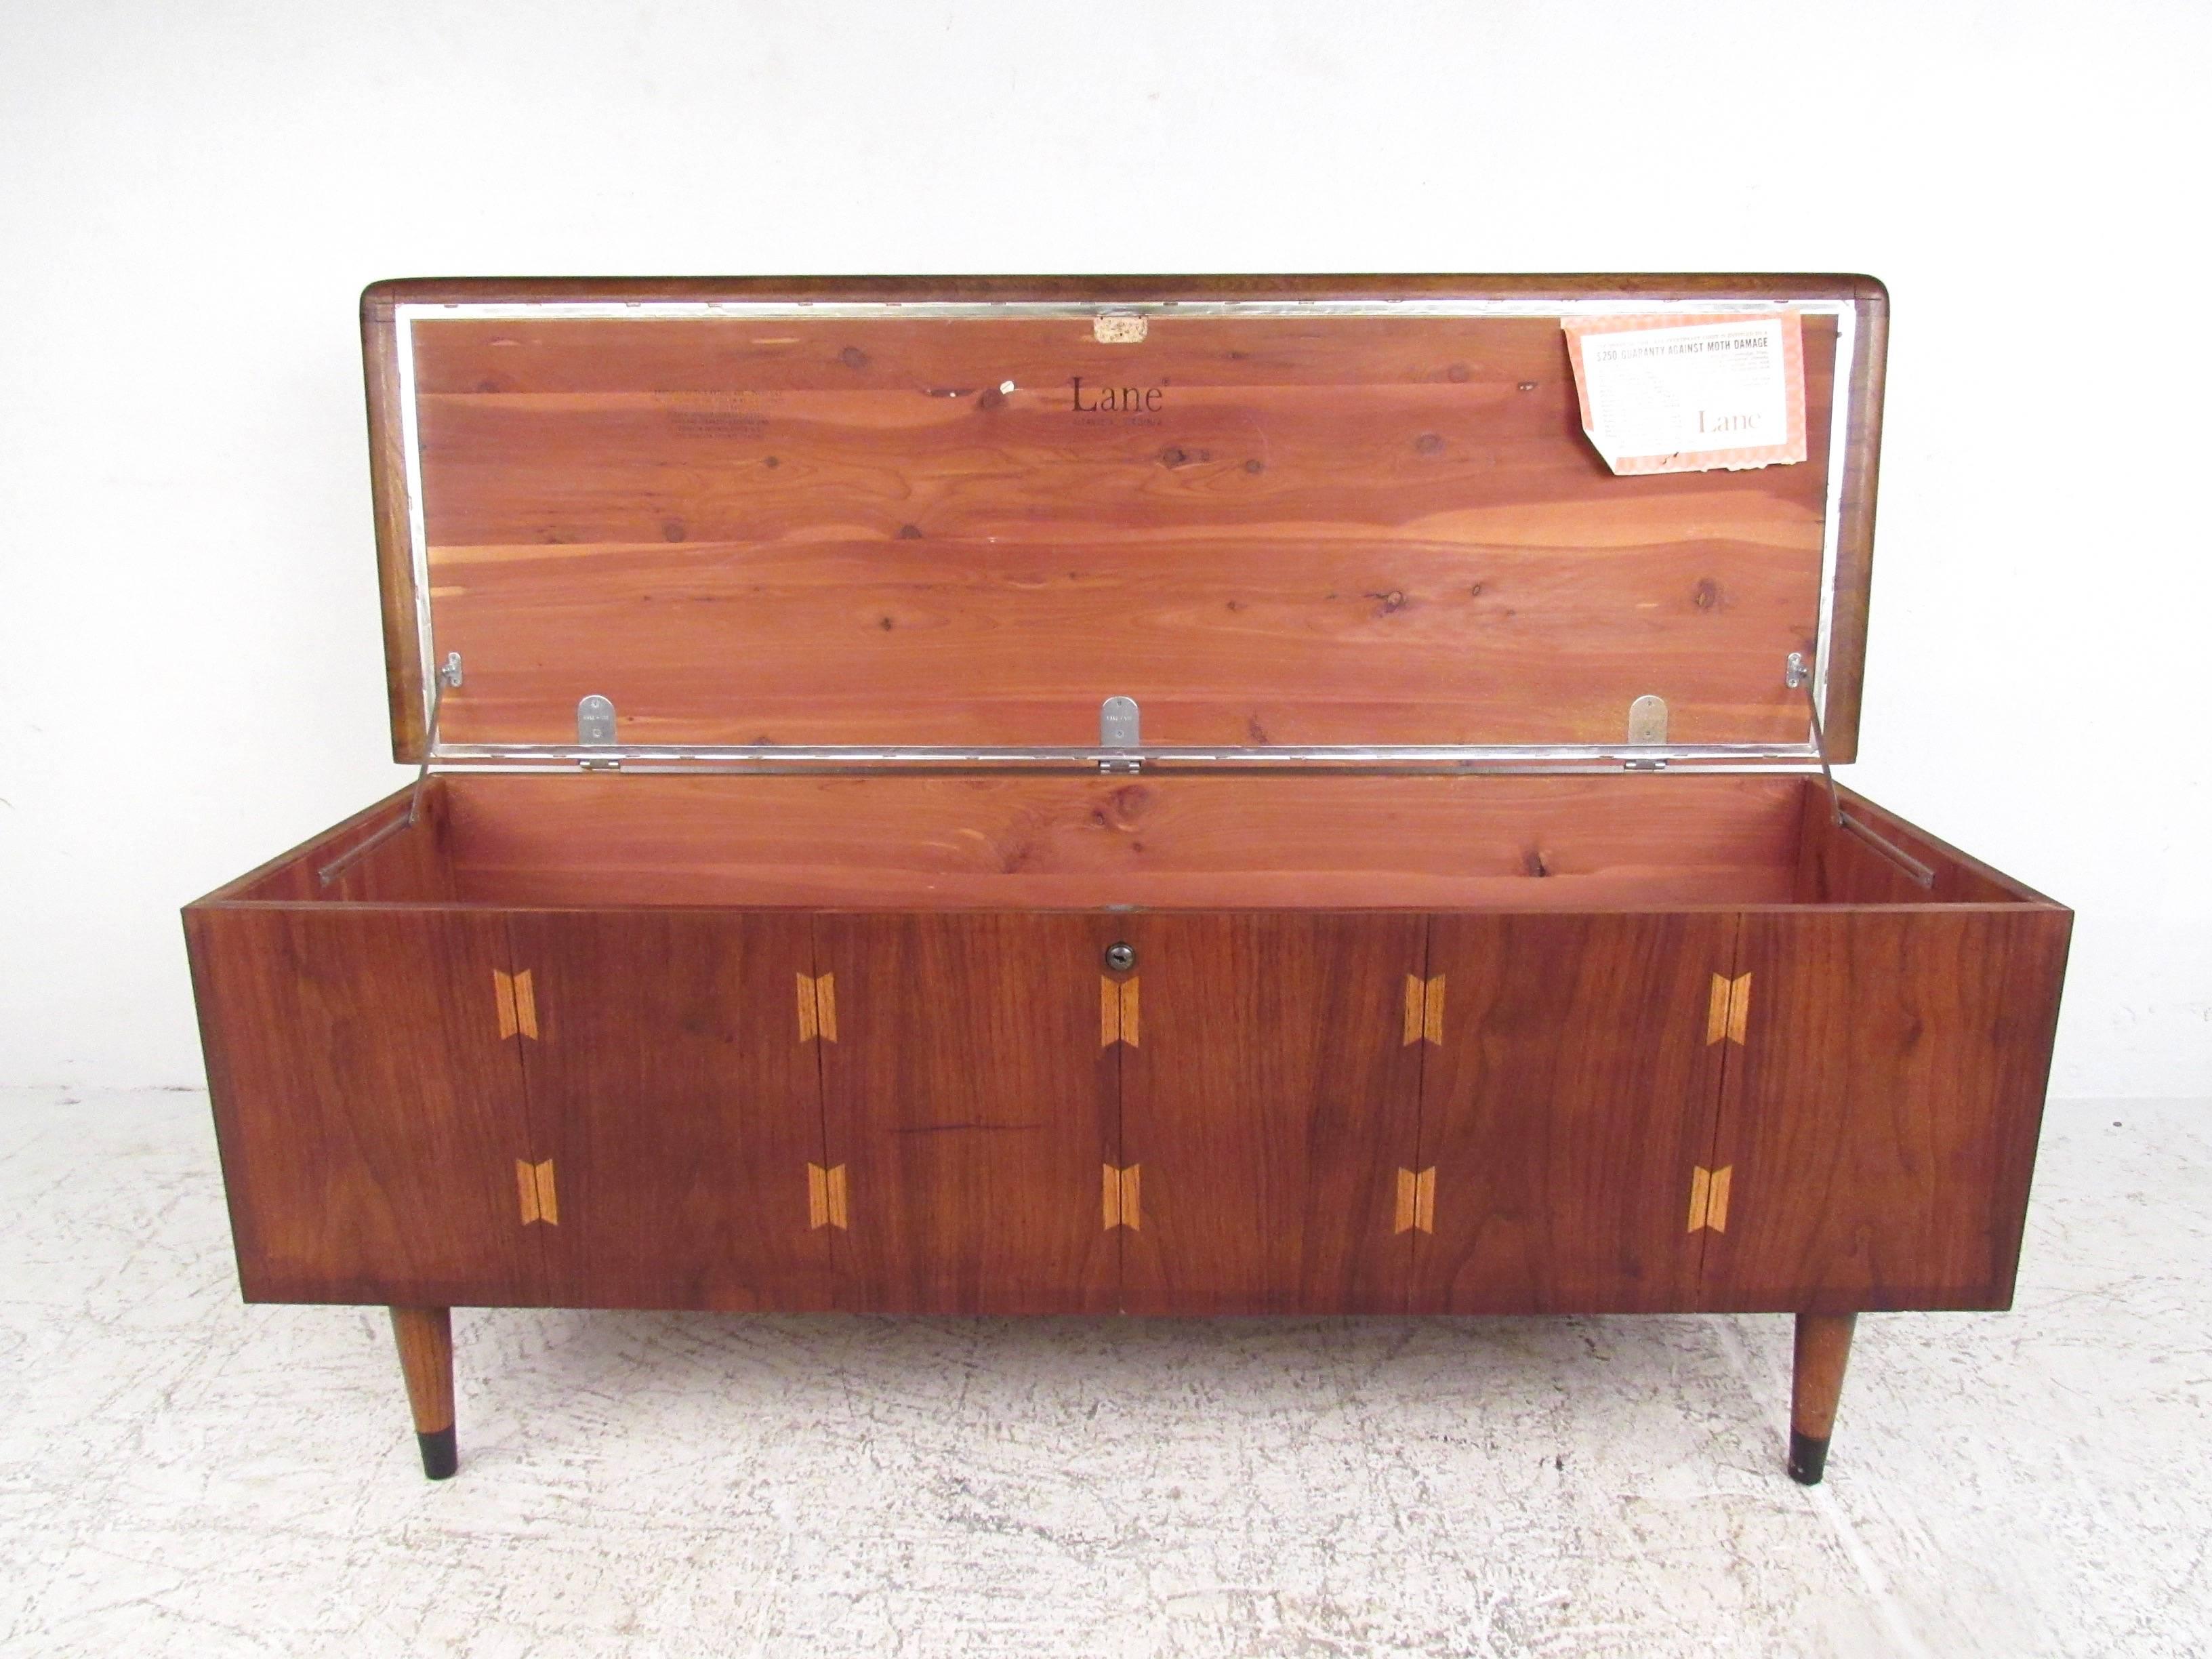 This striking vintage walnut blanket chest offers cedar lined storage and features tapered legs, oak inlays, and easily doubles as an occasional bench. Manufactured by Mid-Century Furniture maker Lane, this vintage piece still has some of it's